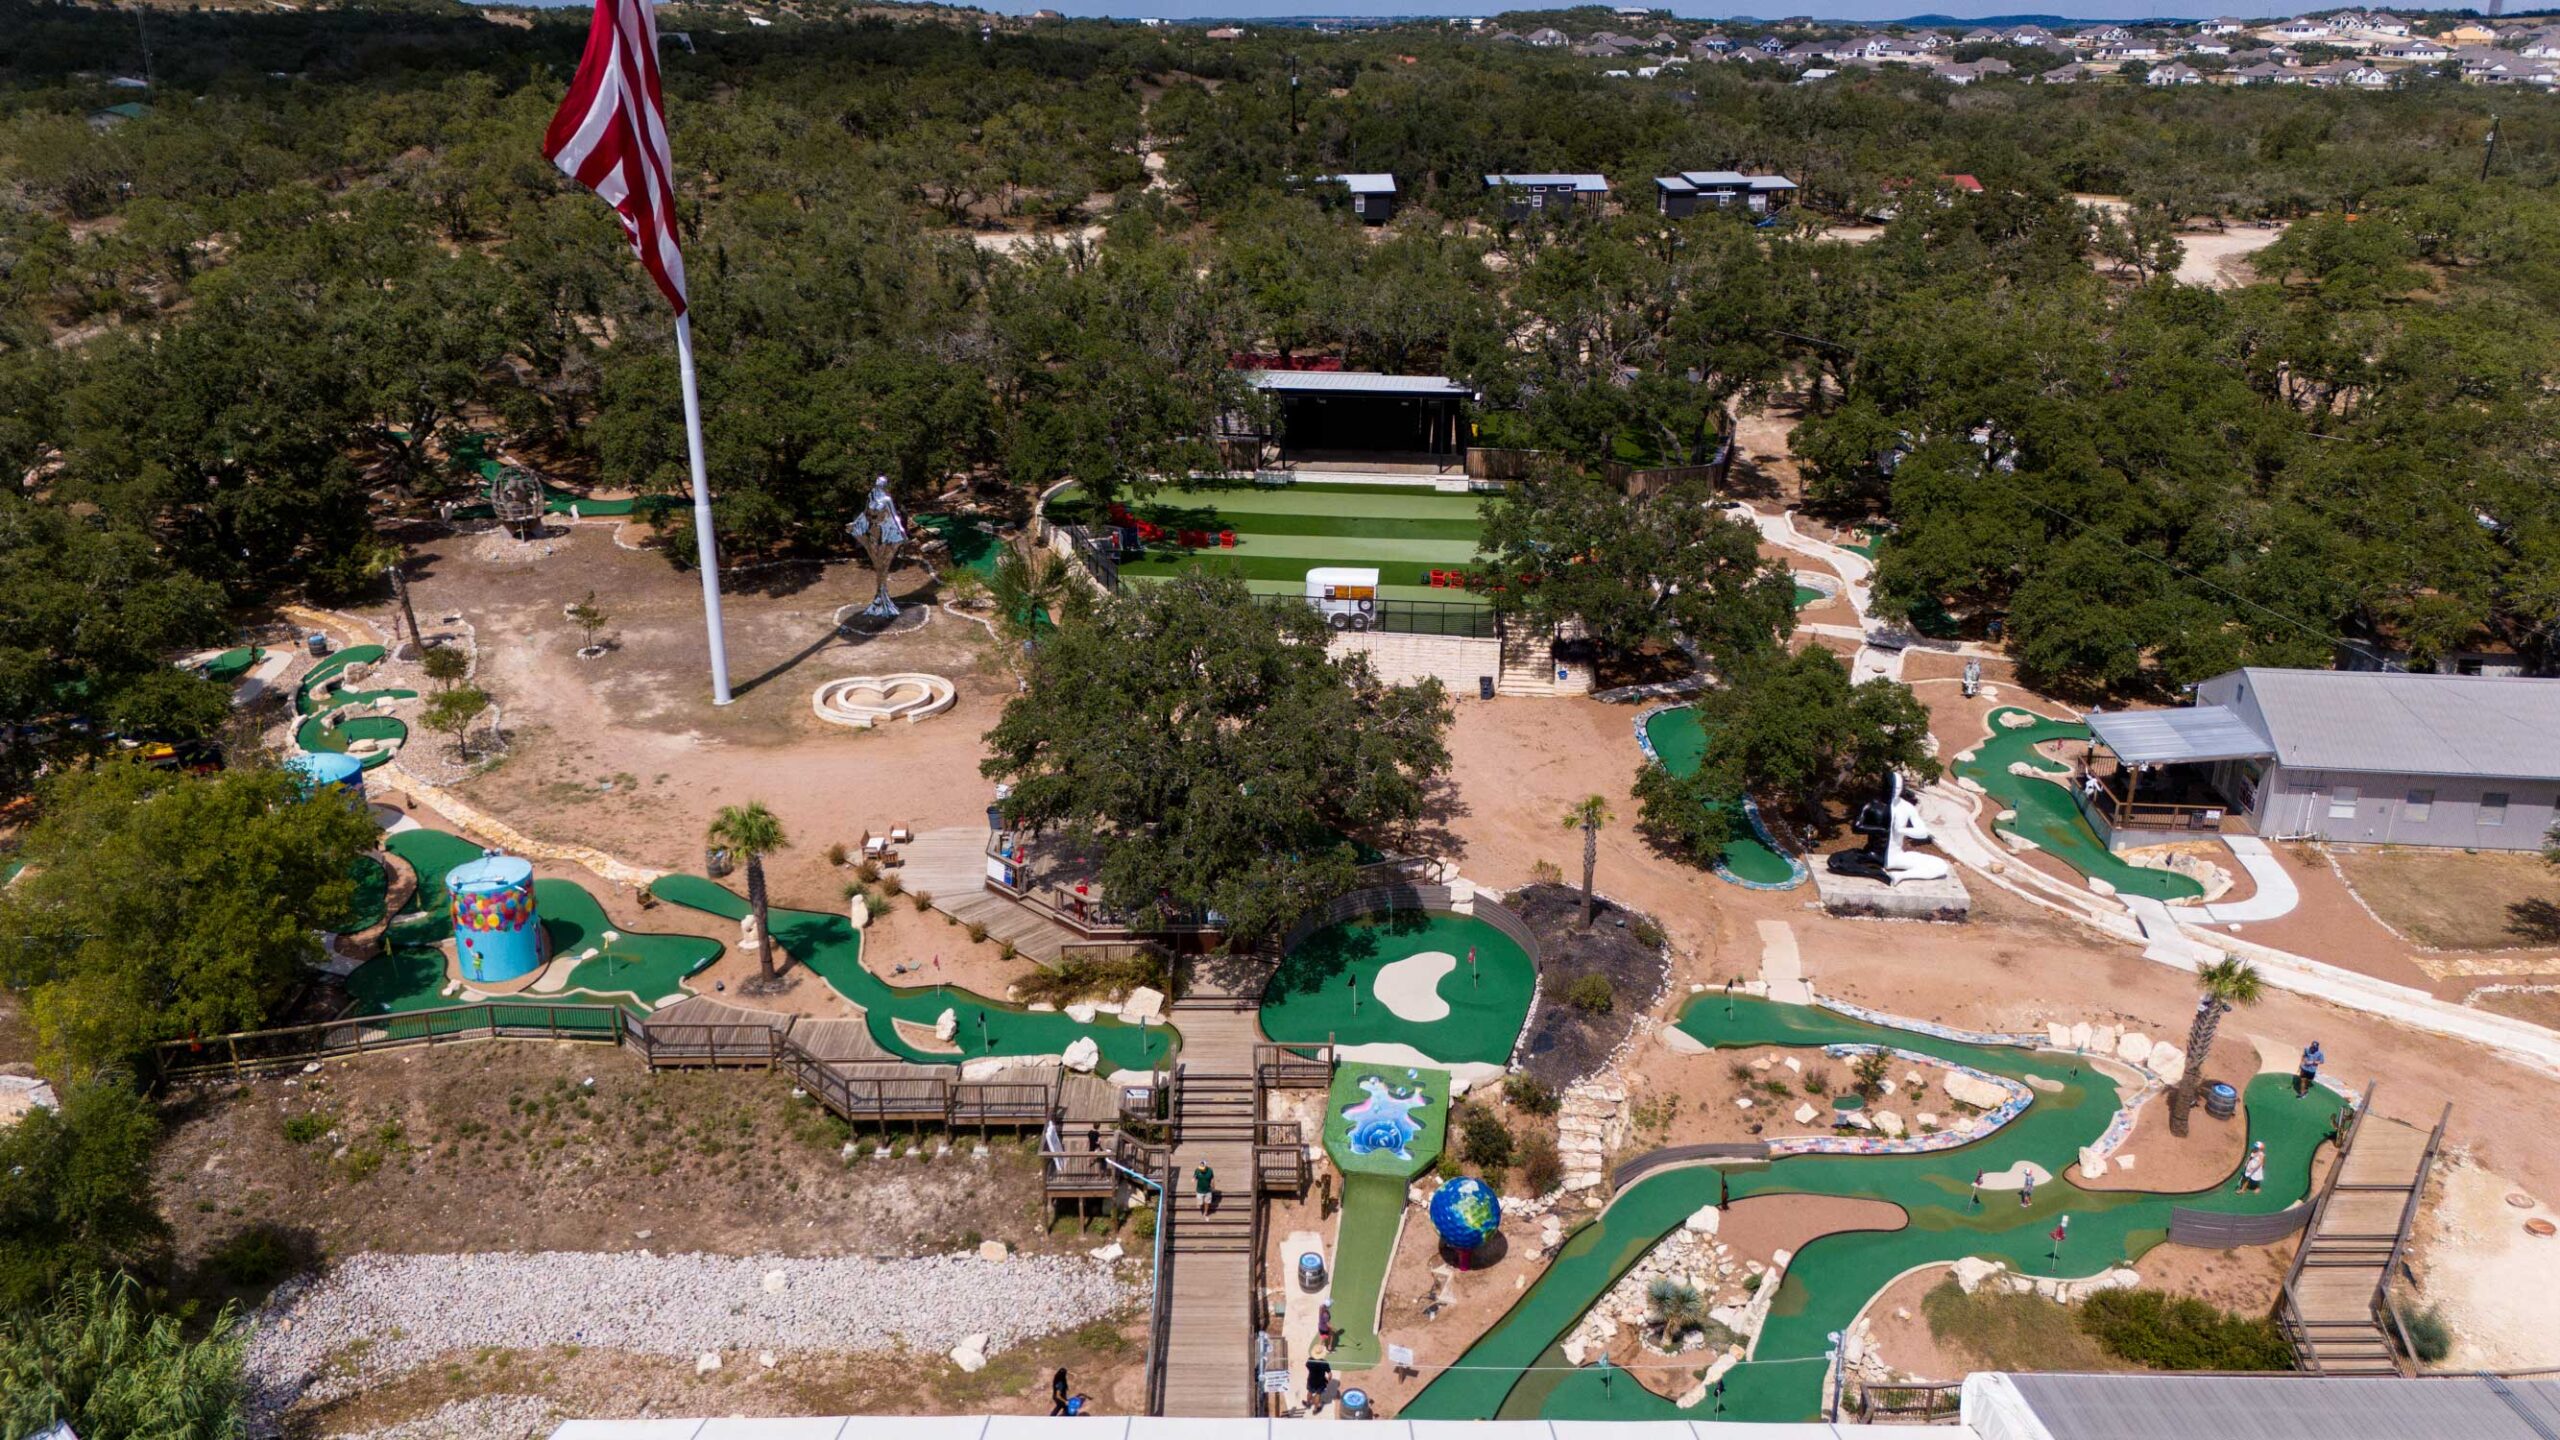 We offer two exciting mini golf courses designed to test your skills while still having fun!